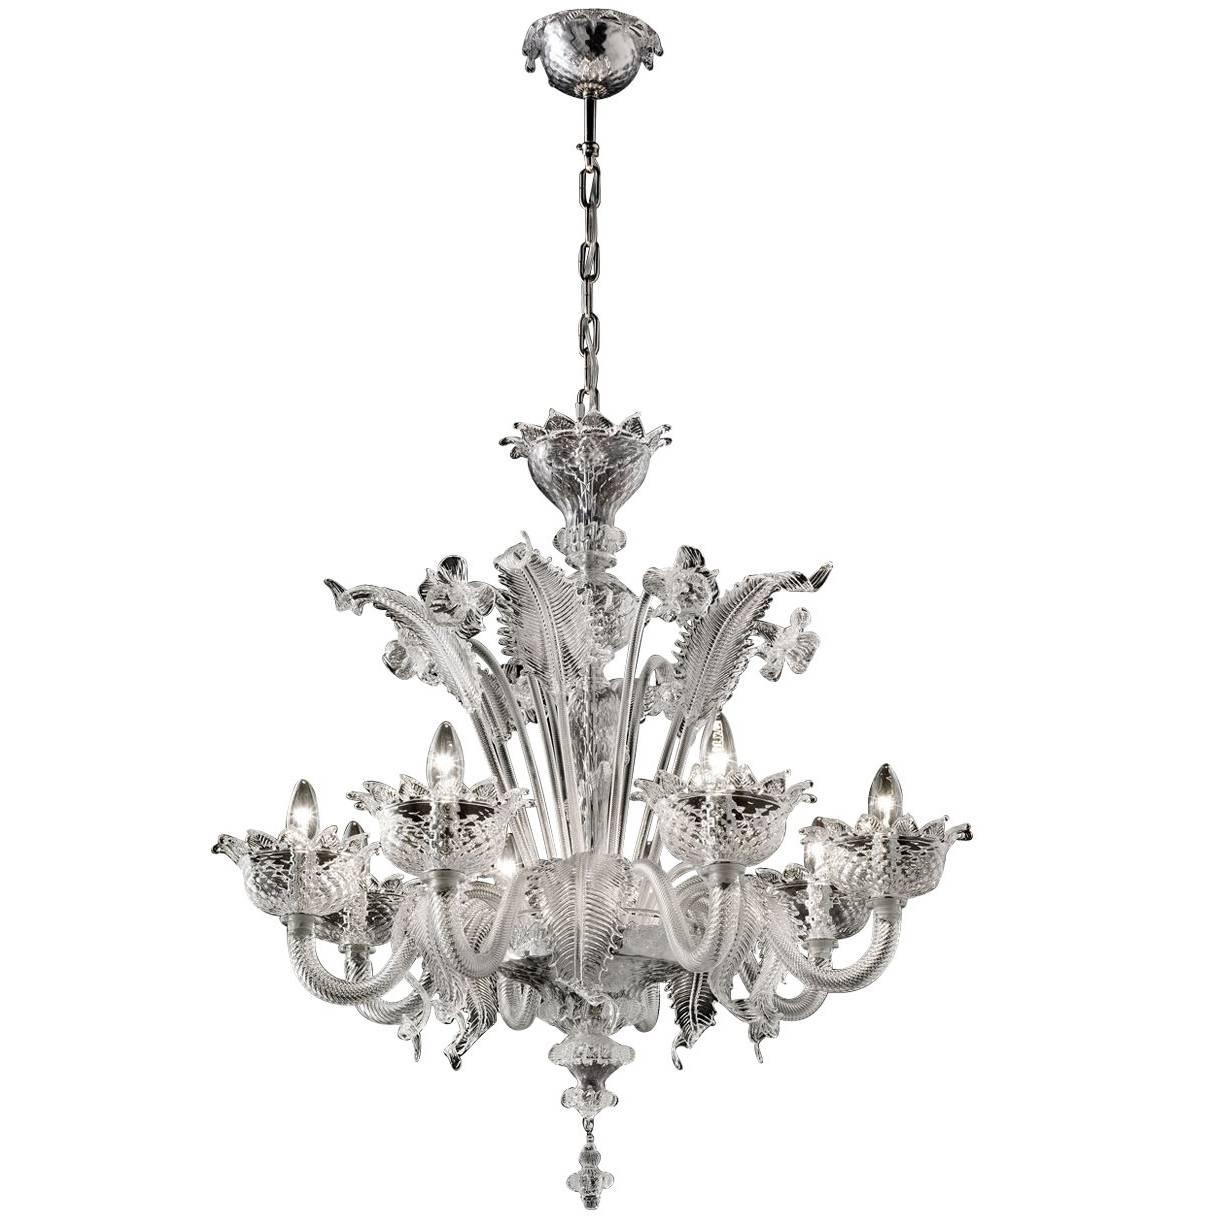 Timeless 'Correr' Chandelier with Fine Floral Motifs